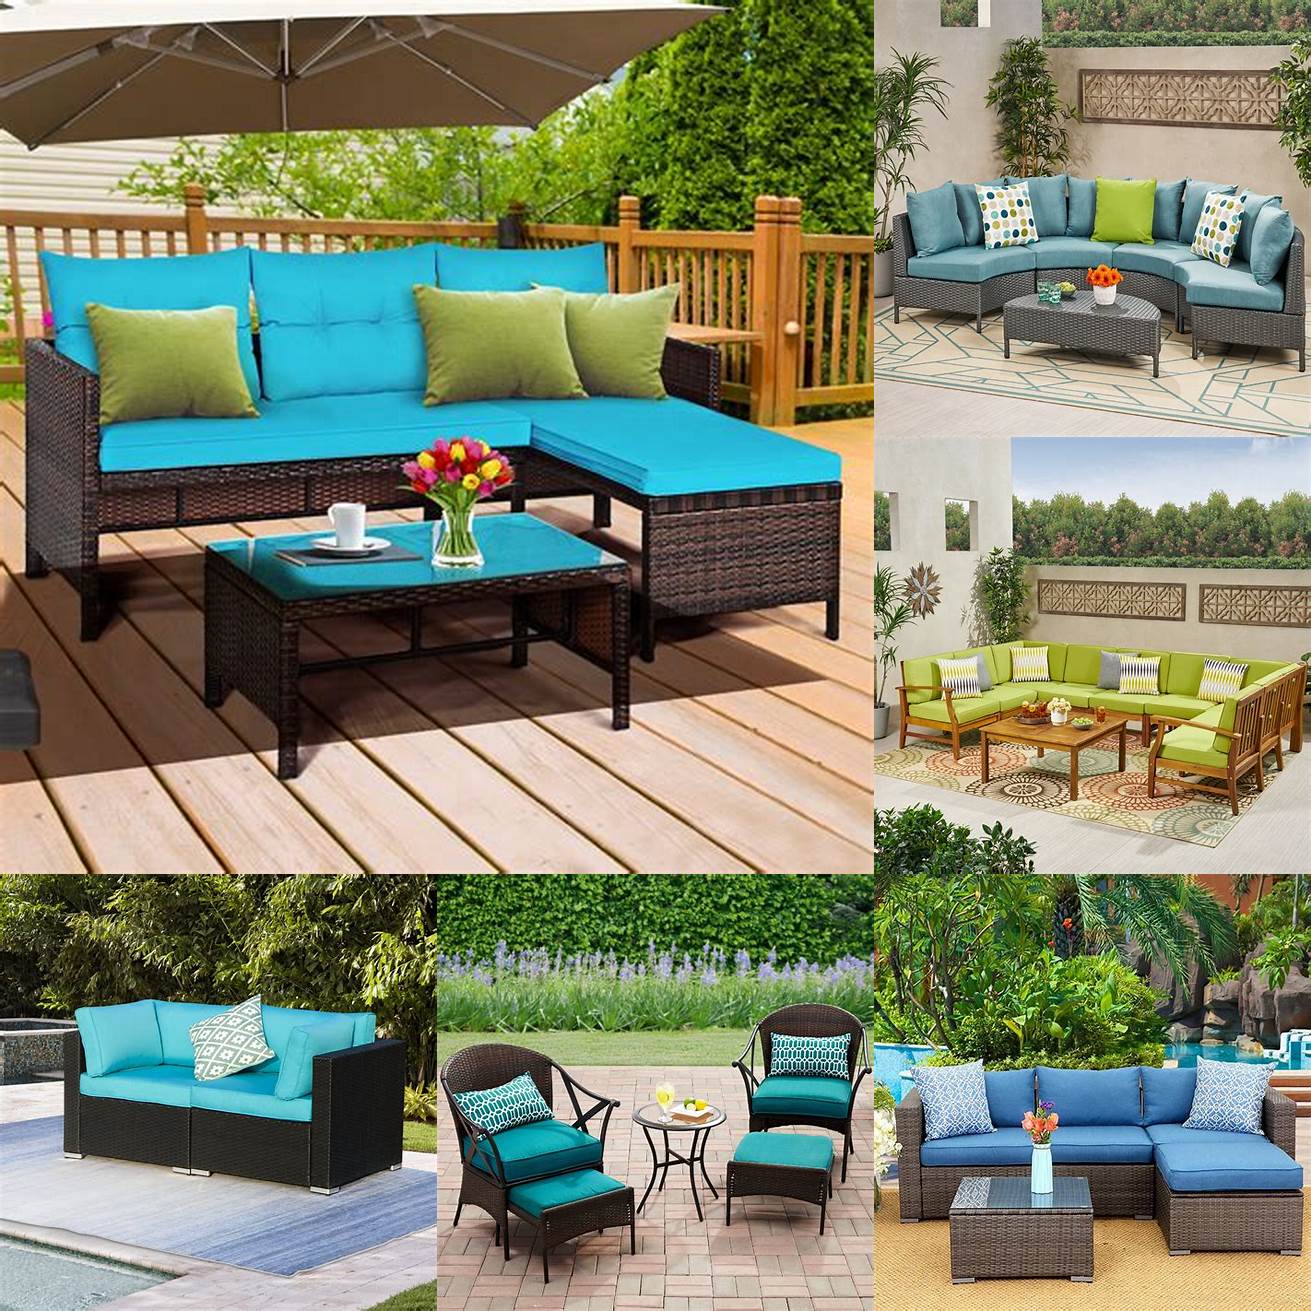 Teal outdoor couch